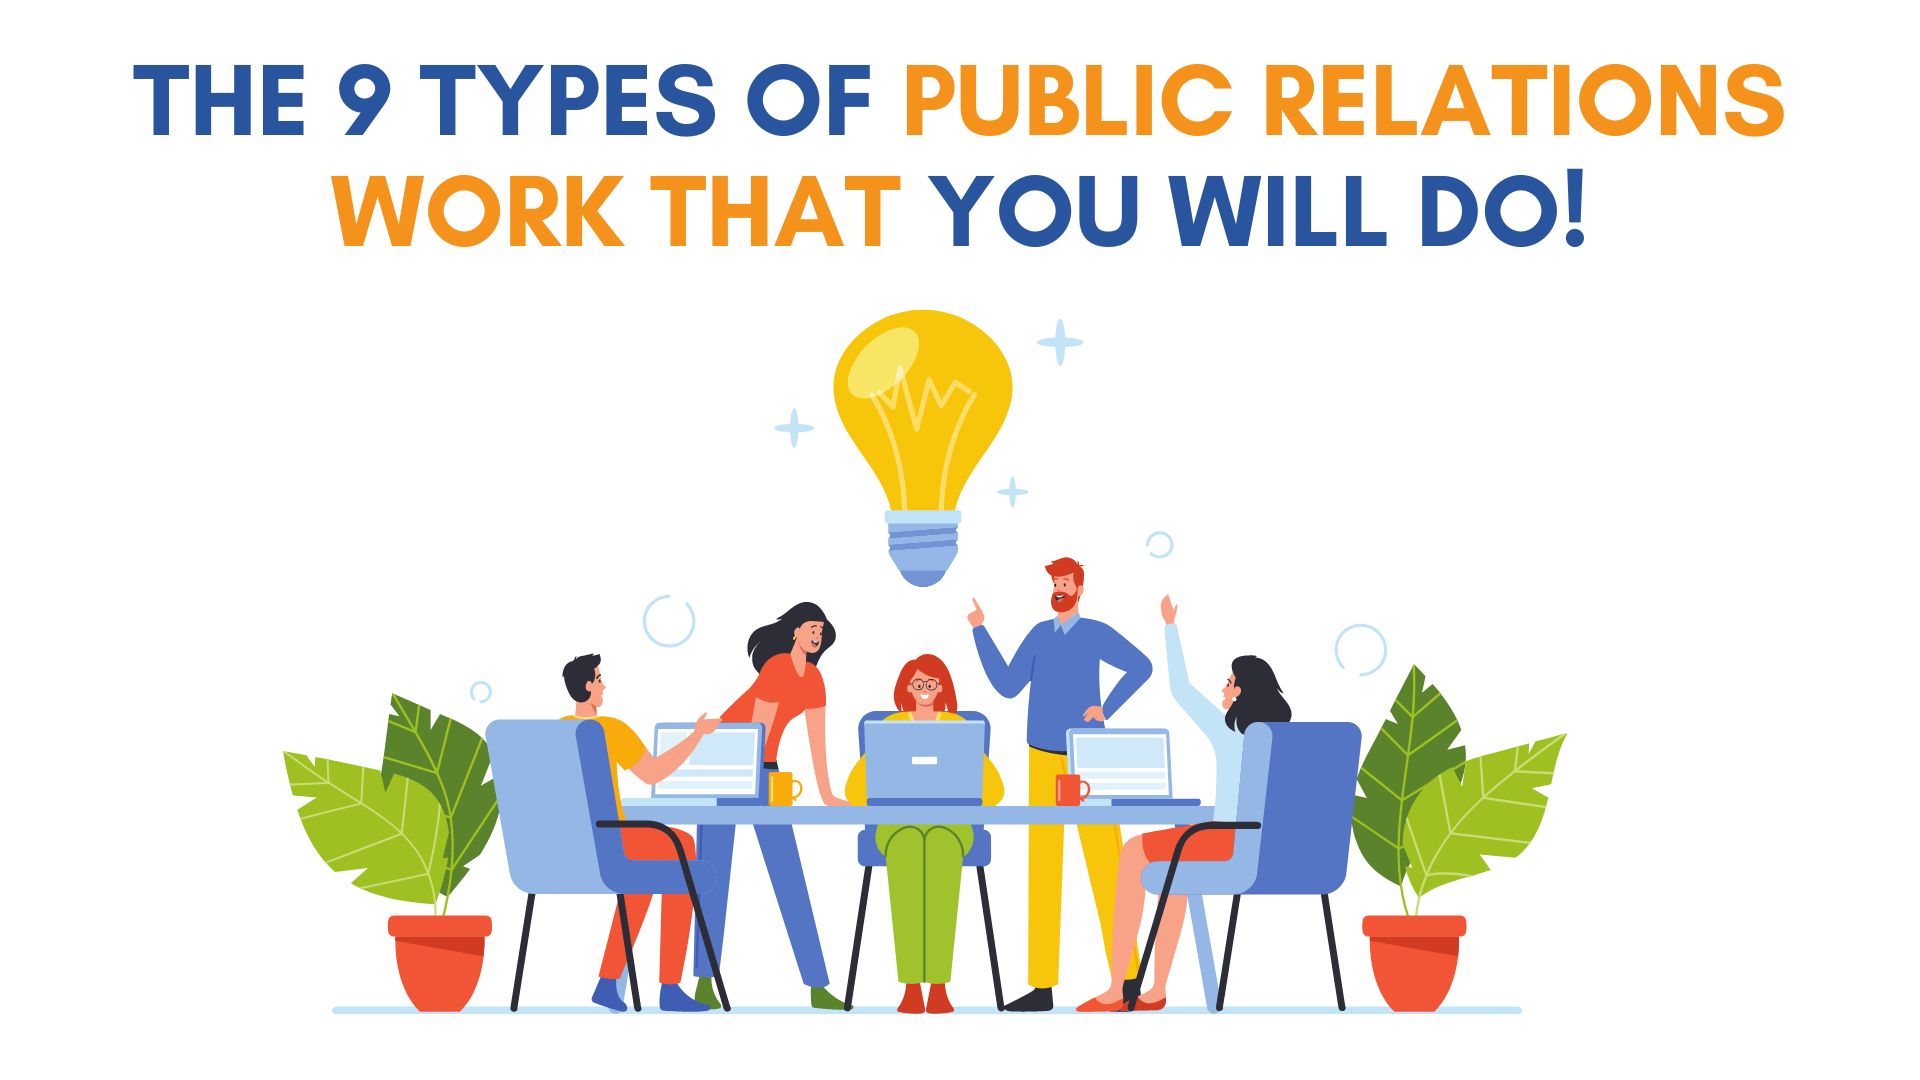 The 9 Types of Public Relations Work that You Will Do